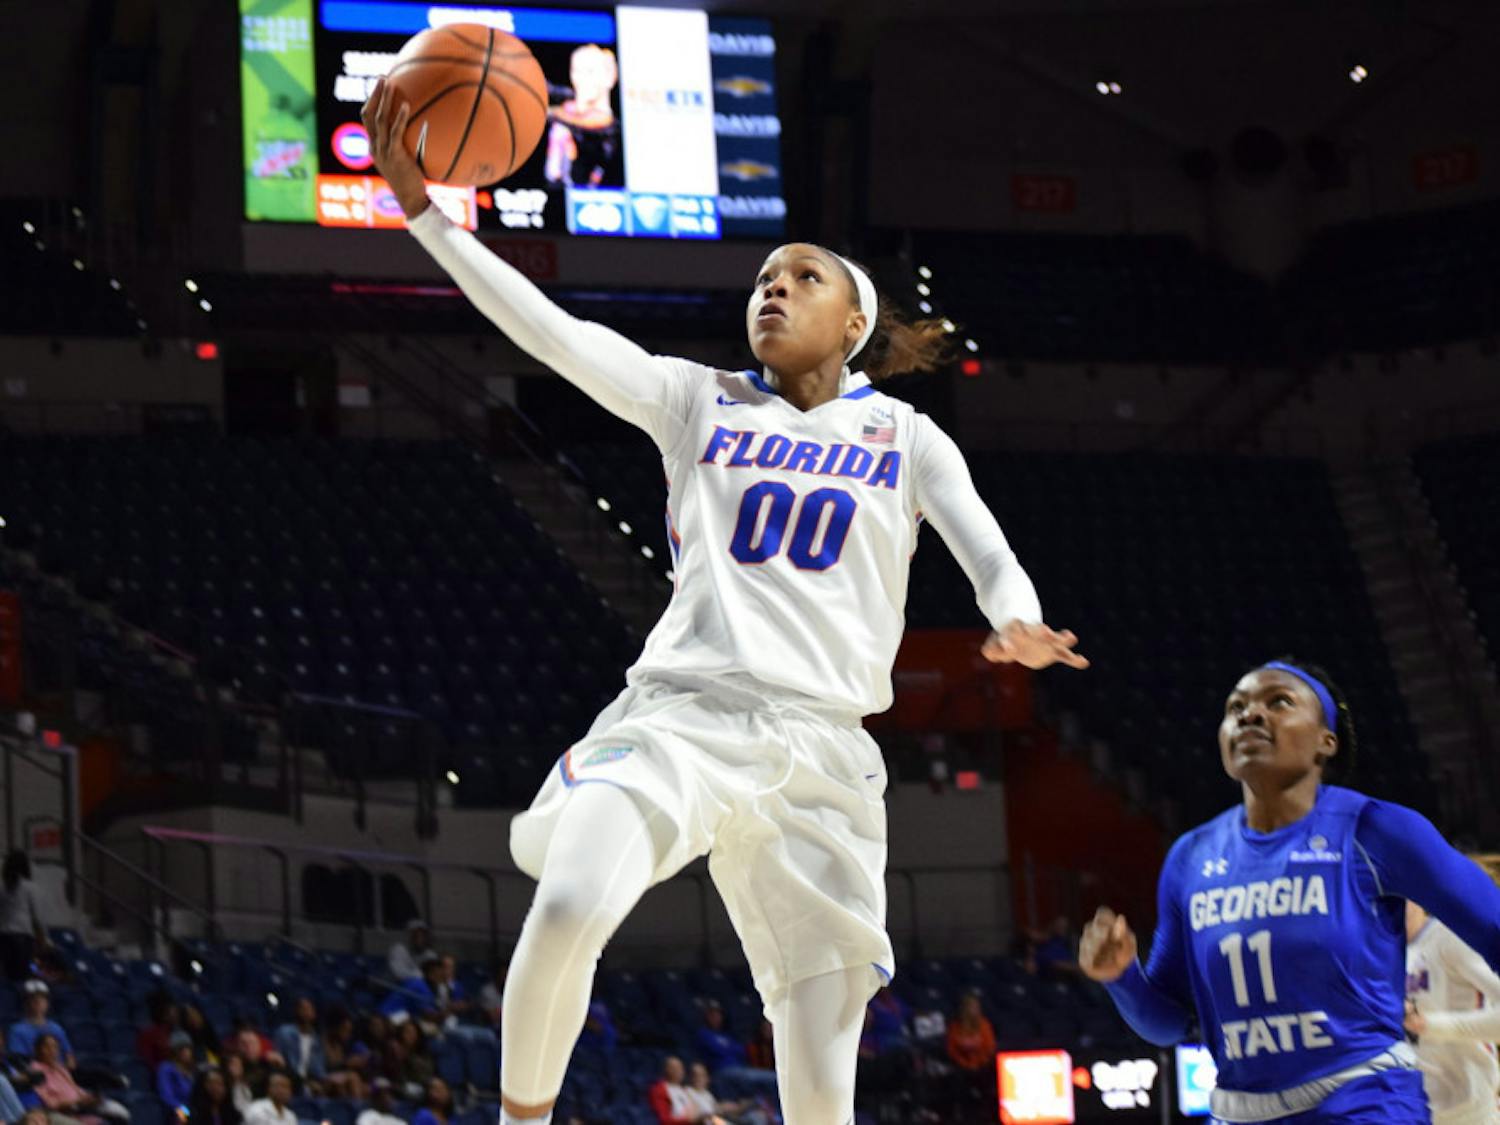 UF guard Delicia Washington collected 10 rebounds and three assists during Florida's 72-67 win over Texas Tech on Sunday at the O'Connell Center.